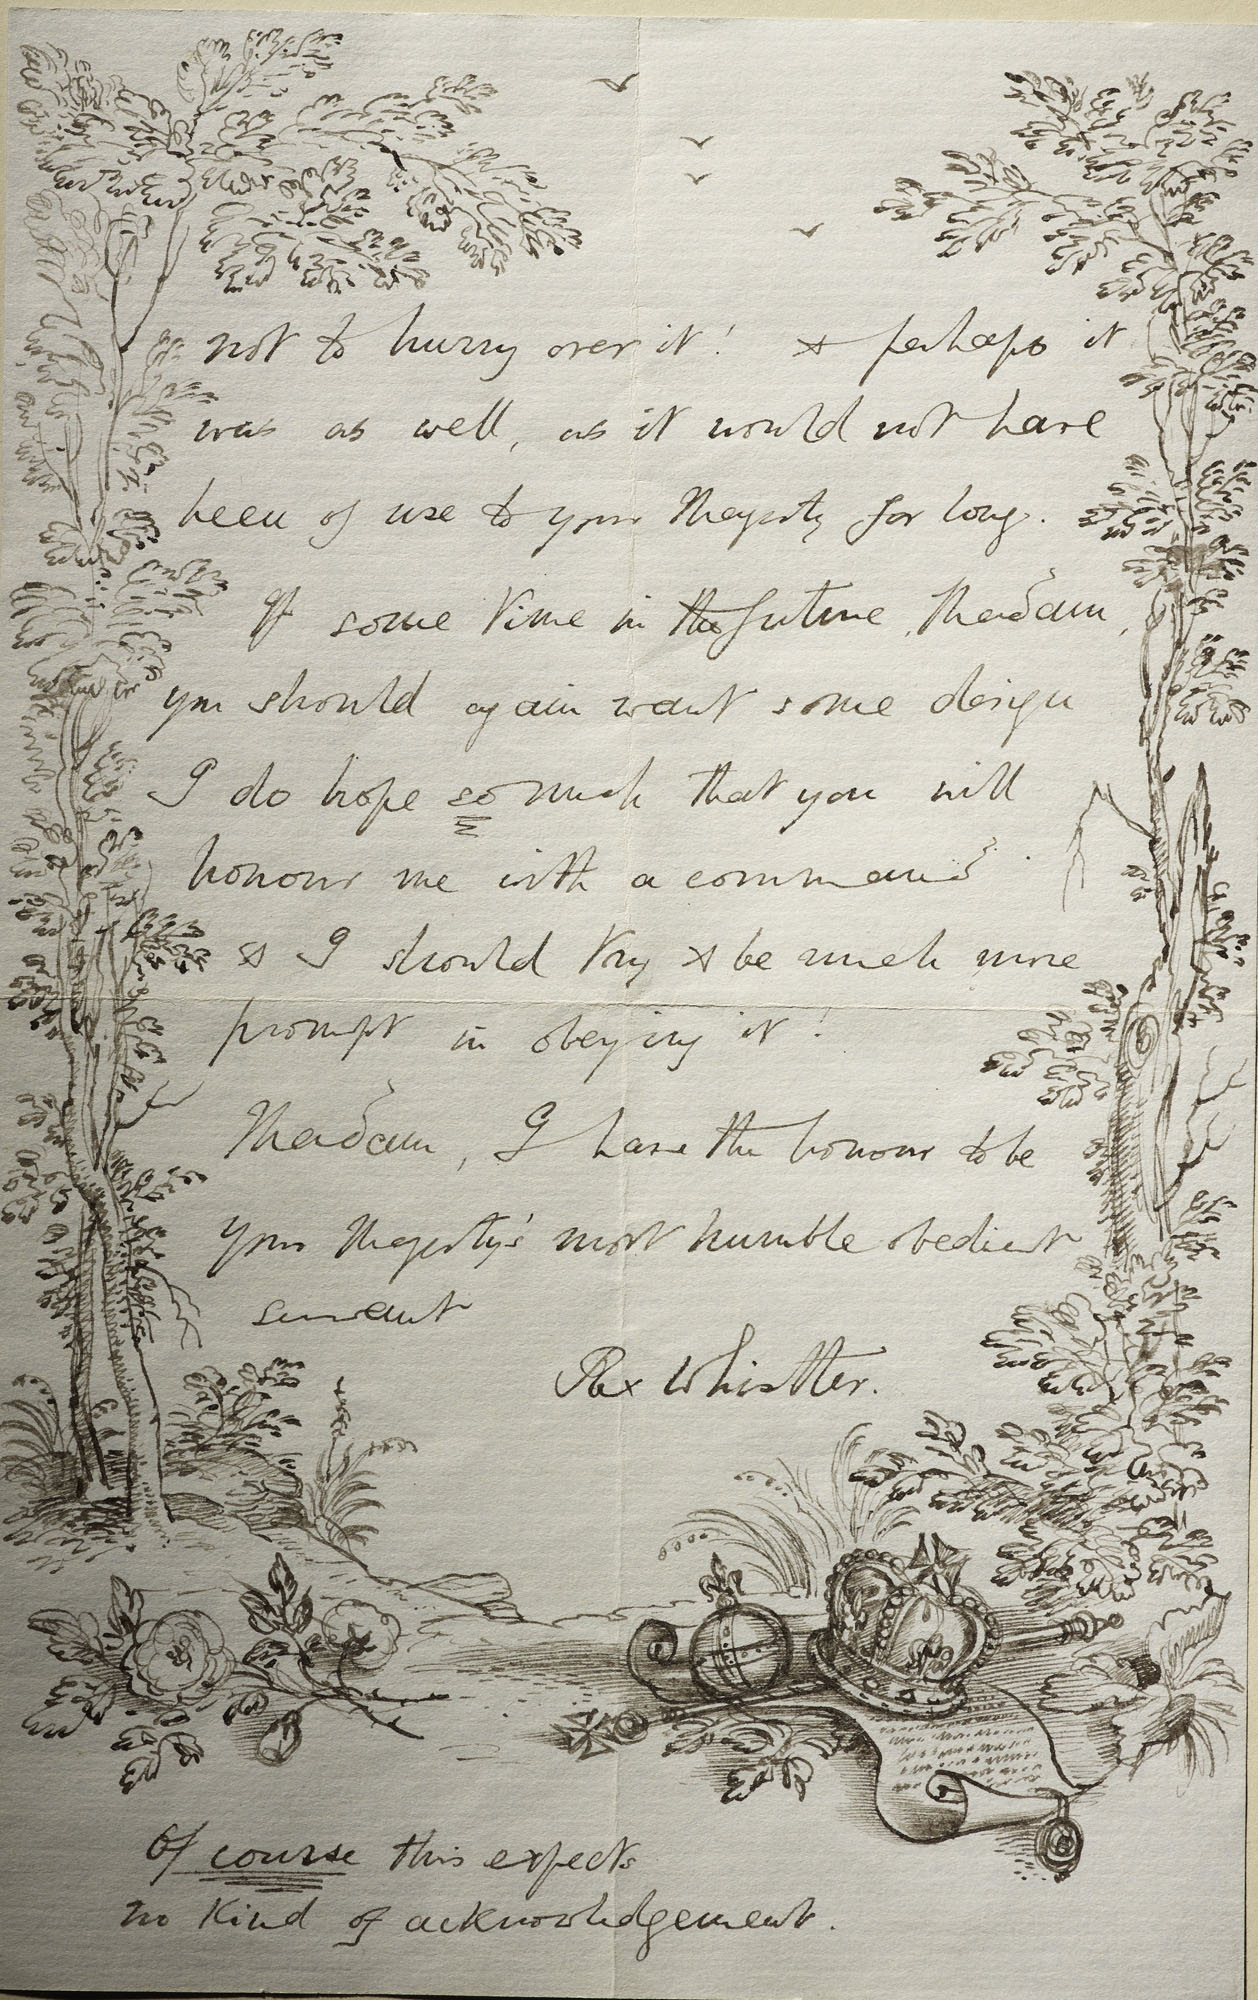 Hand-illustrated letter from Rex Whistler to Queen Elizabeth, 24 January 1937